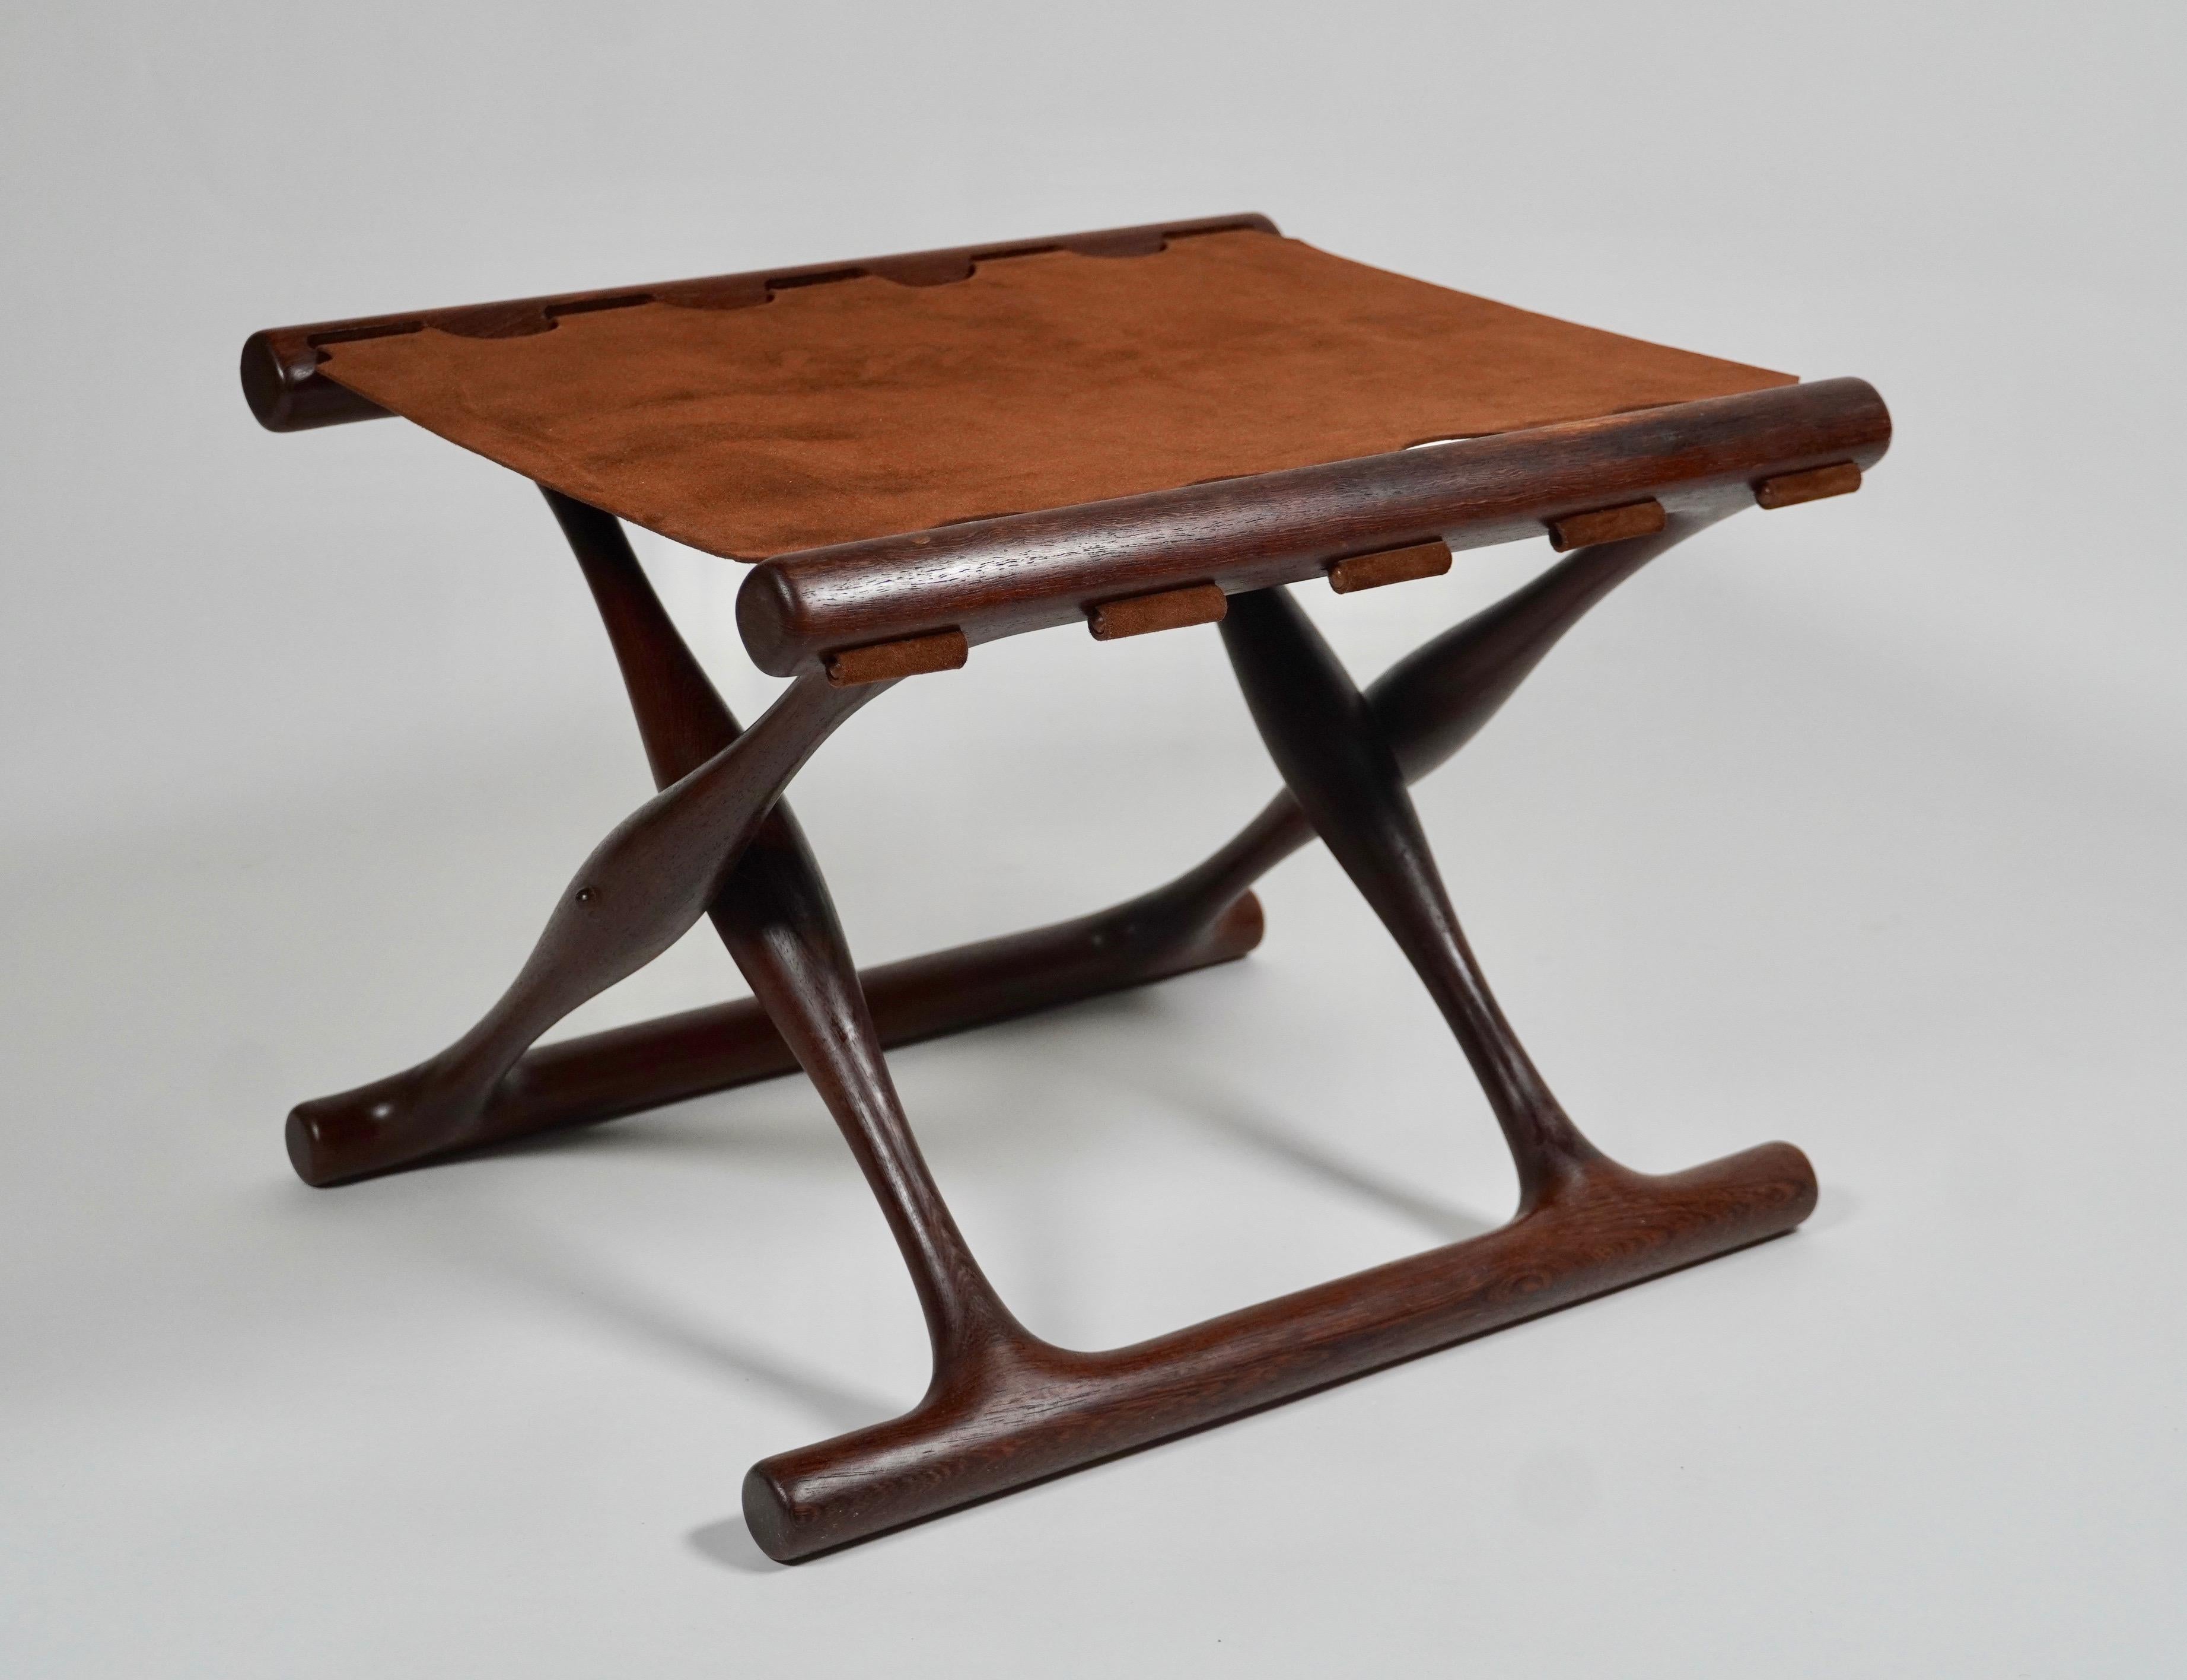 Folding Poul Hundevad, PH43 stool 'Goldhøj', Denmark, 1960s.
This is a rare model that is made of solid African wenge and high quality cinnamon colored suede leather. The inspiration for this design was drawn from oldest preserved piece of